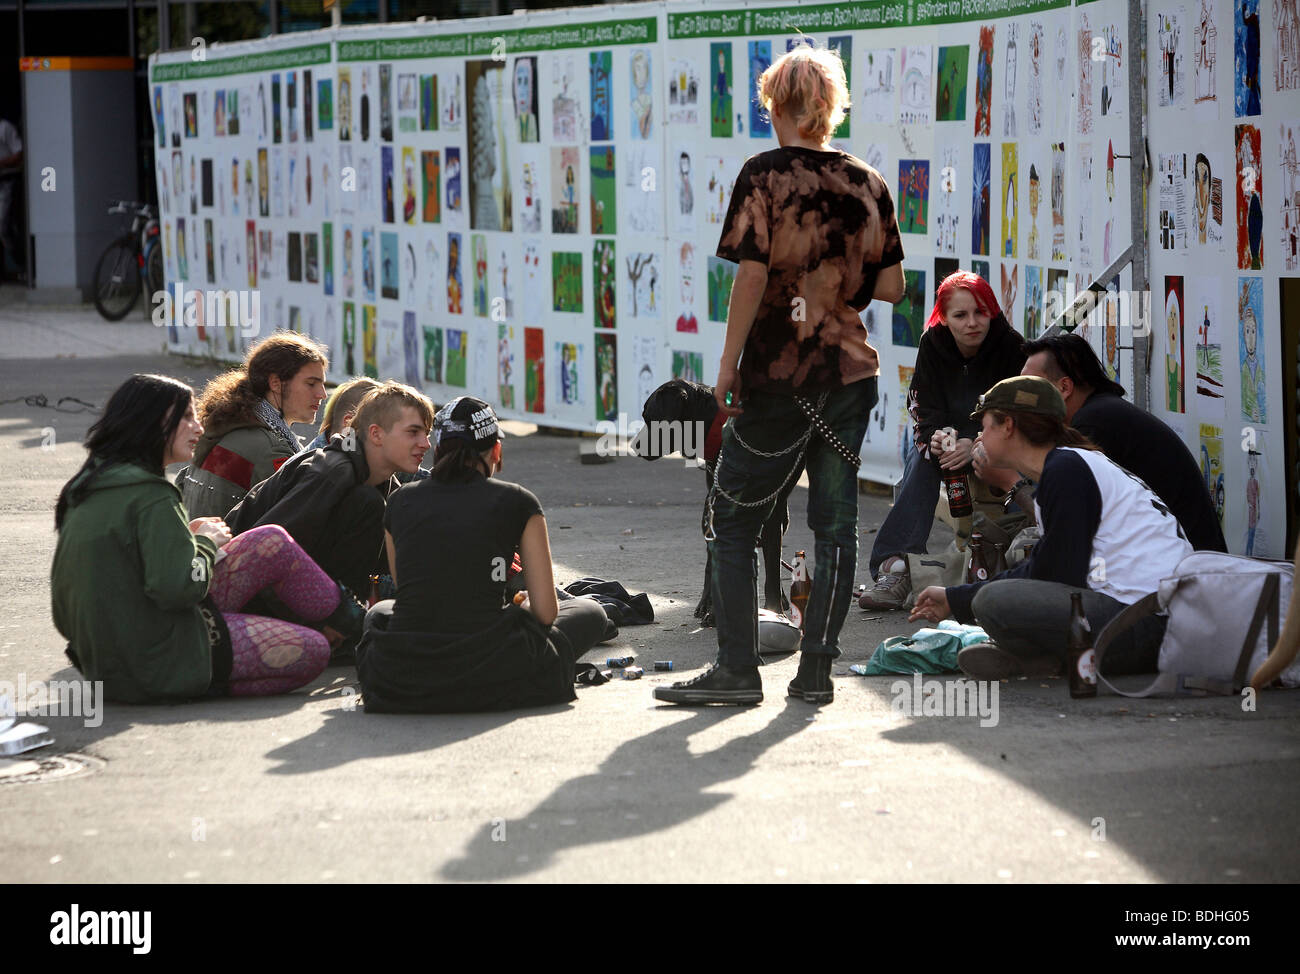 Young people sitting on the street, Leipzig, Germany Stock Photo